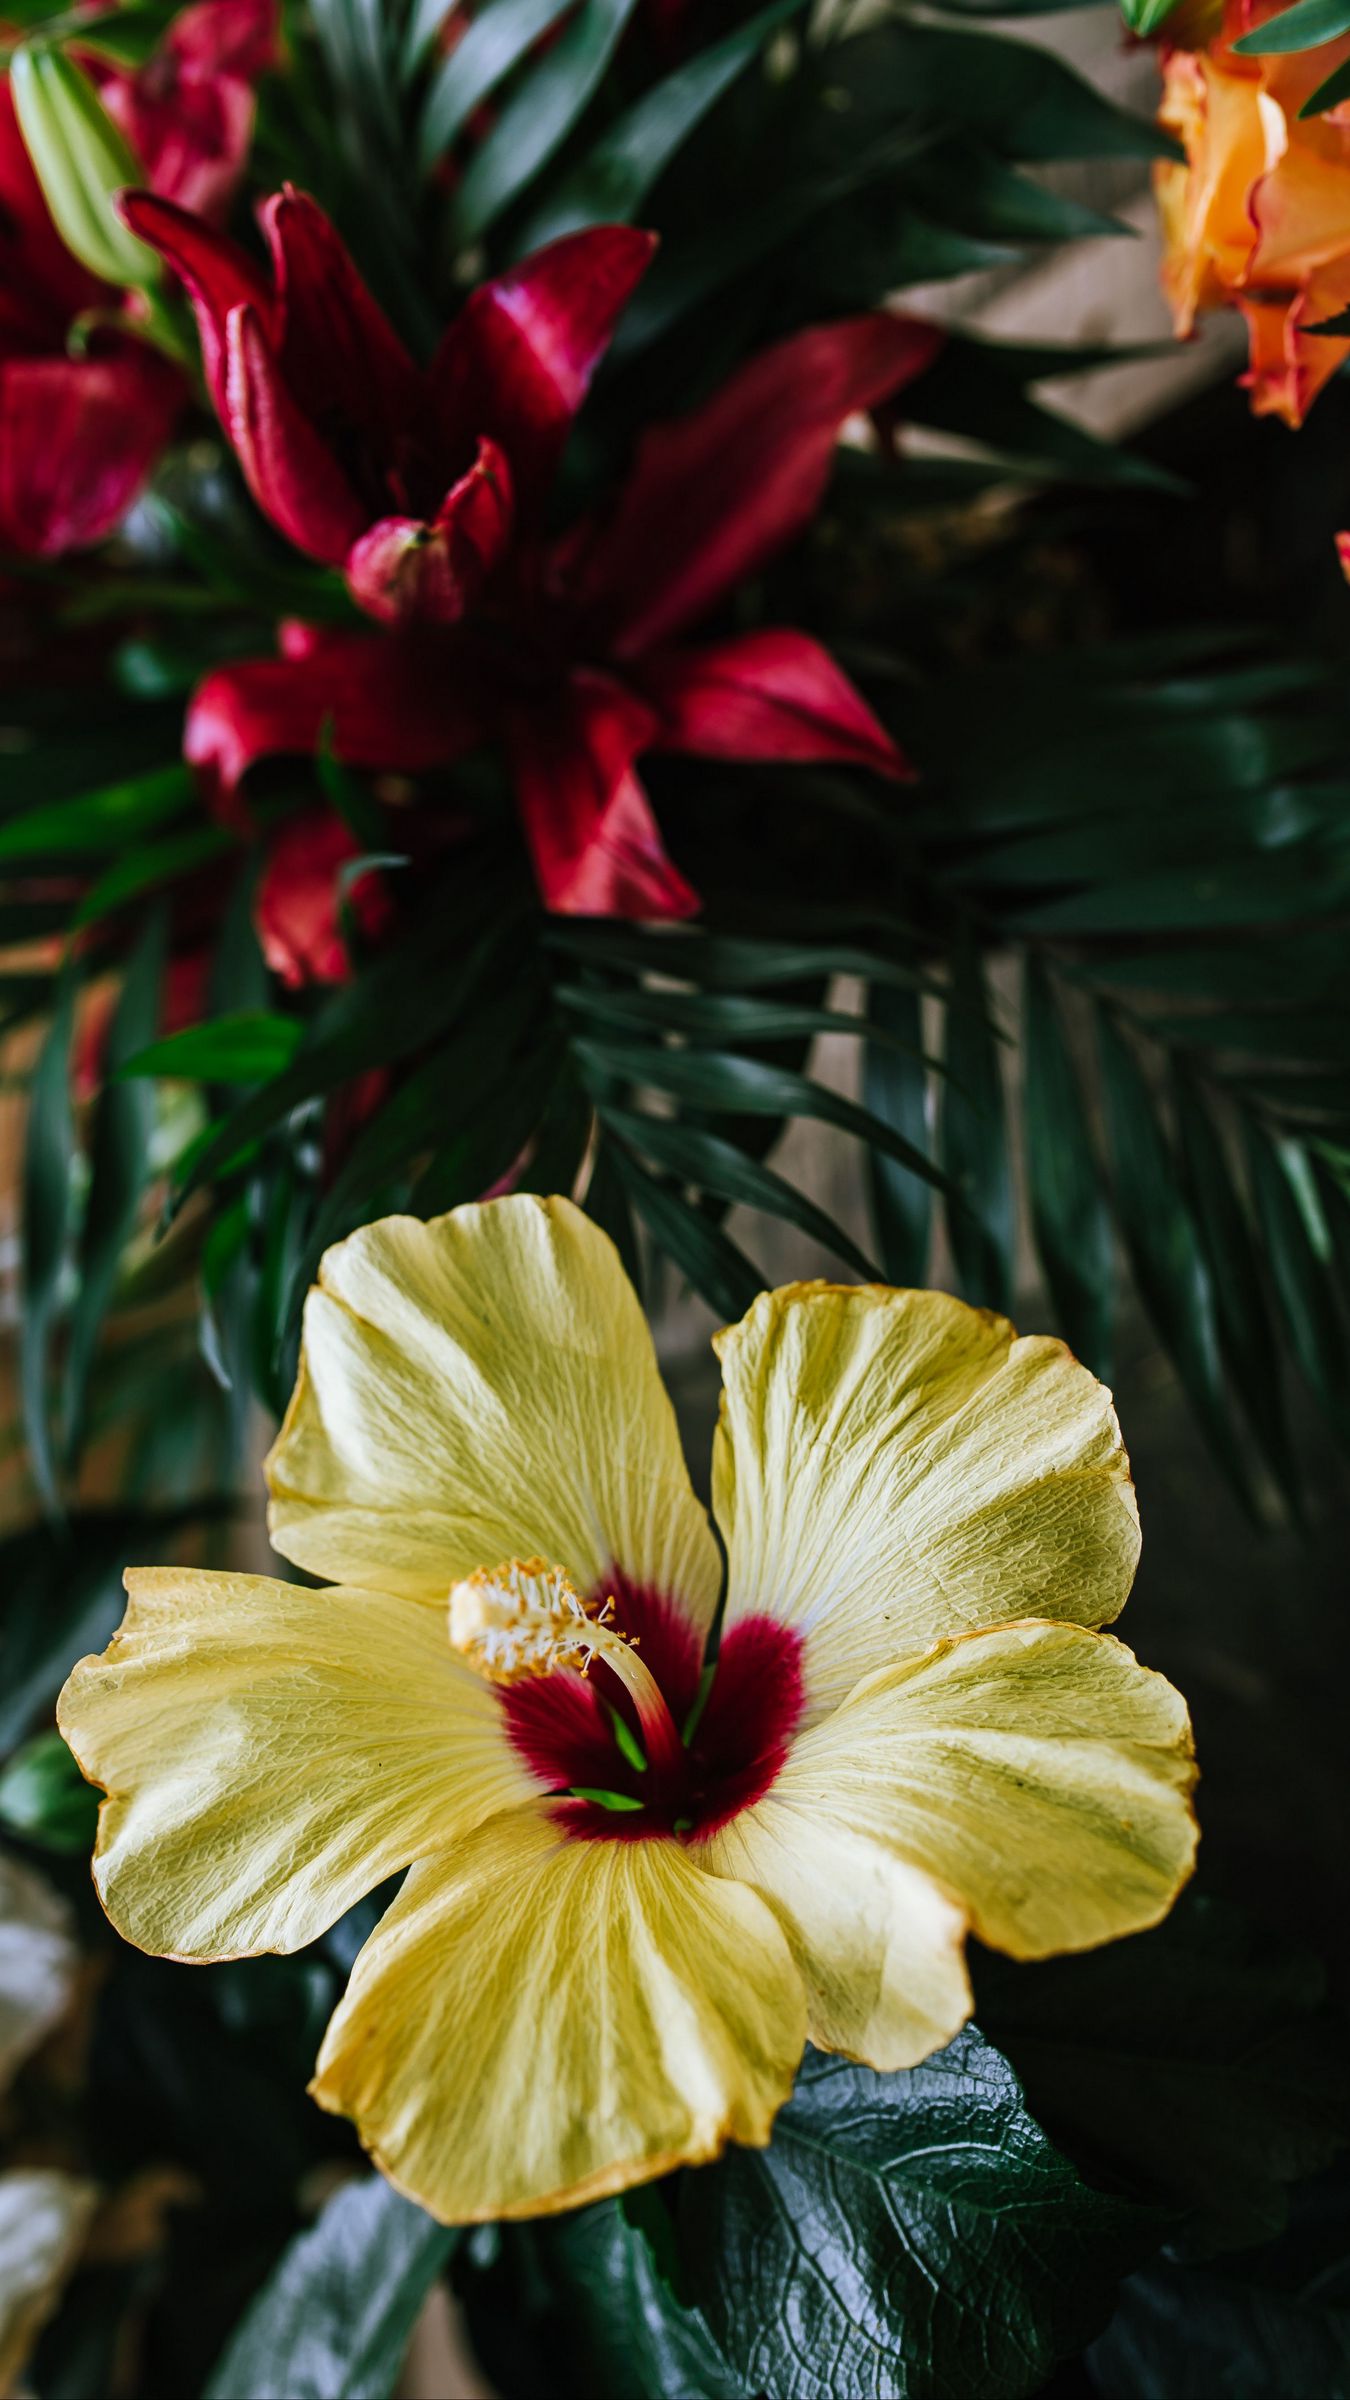 Hibiscus Flower Wallpaper Background Wallpaper Image For Free Download   Pngtree